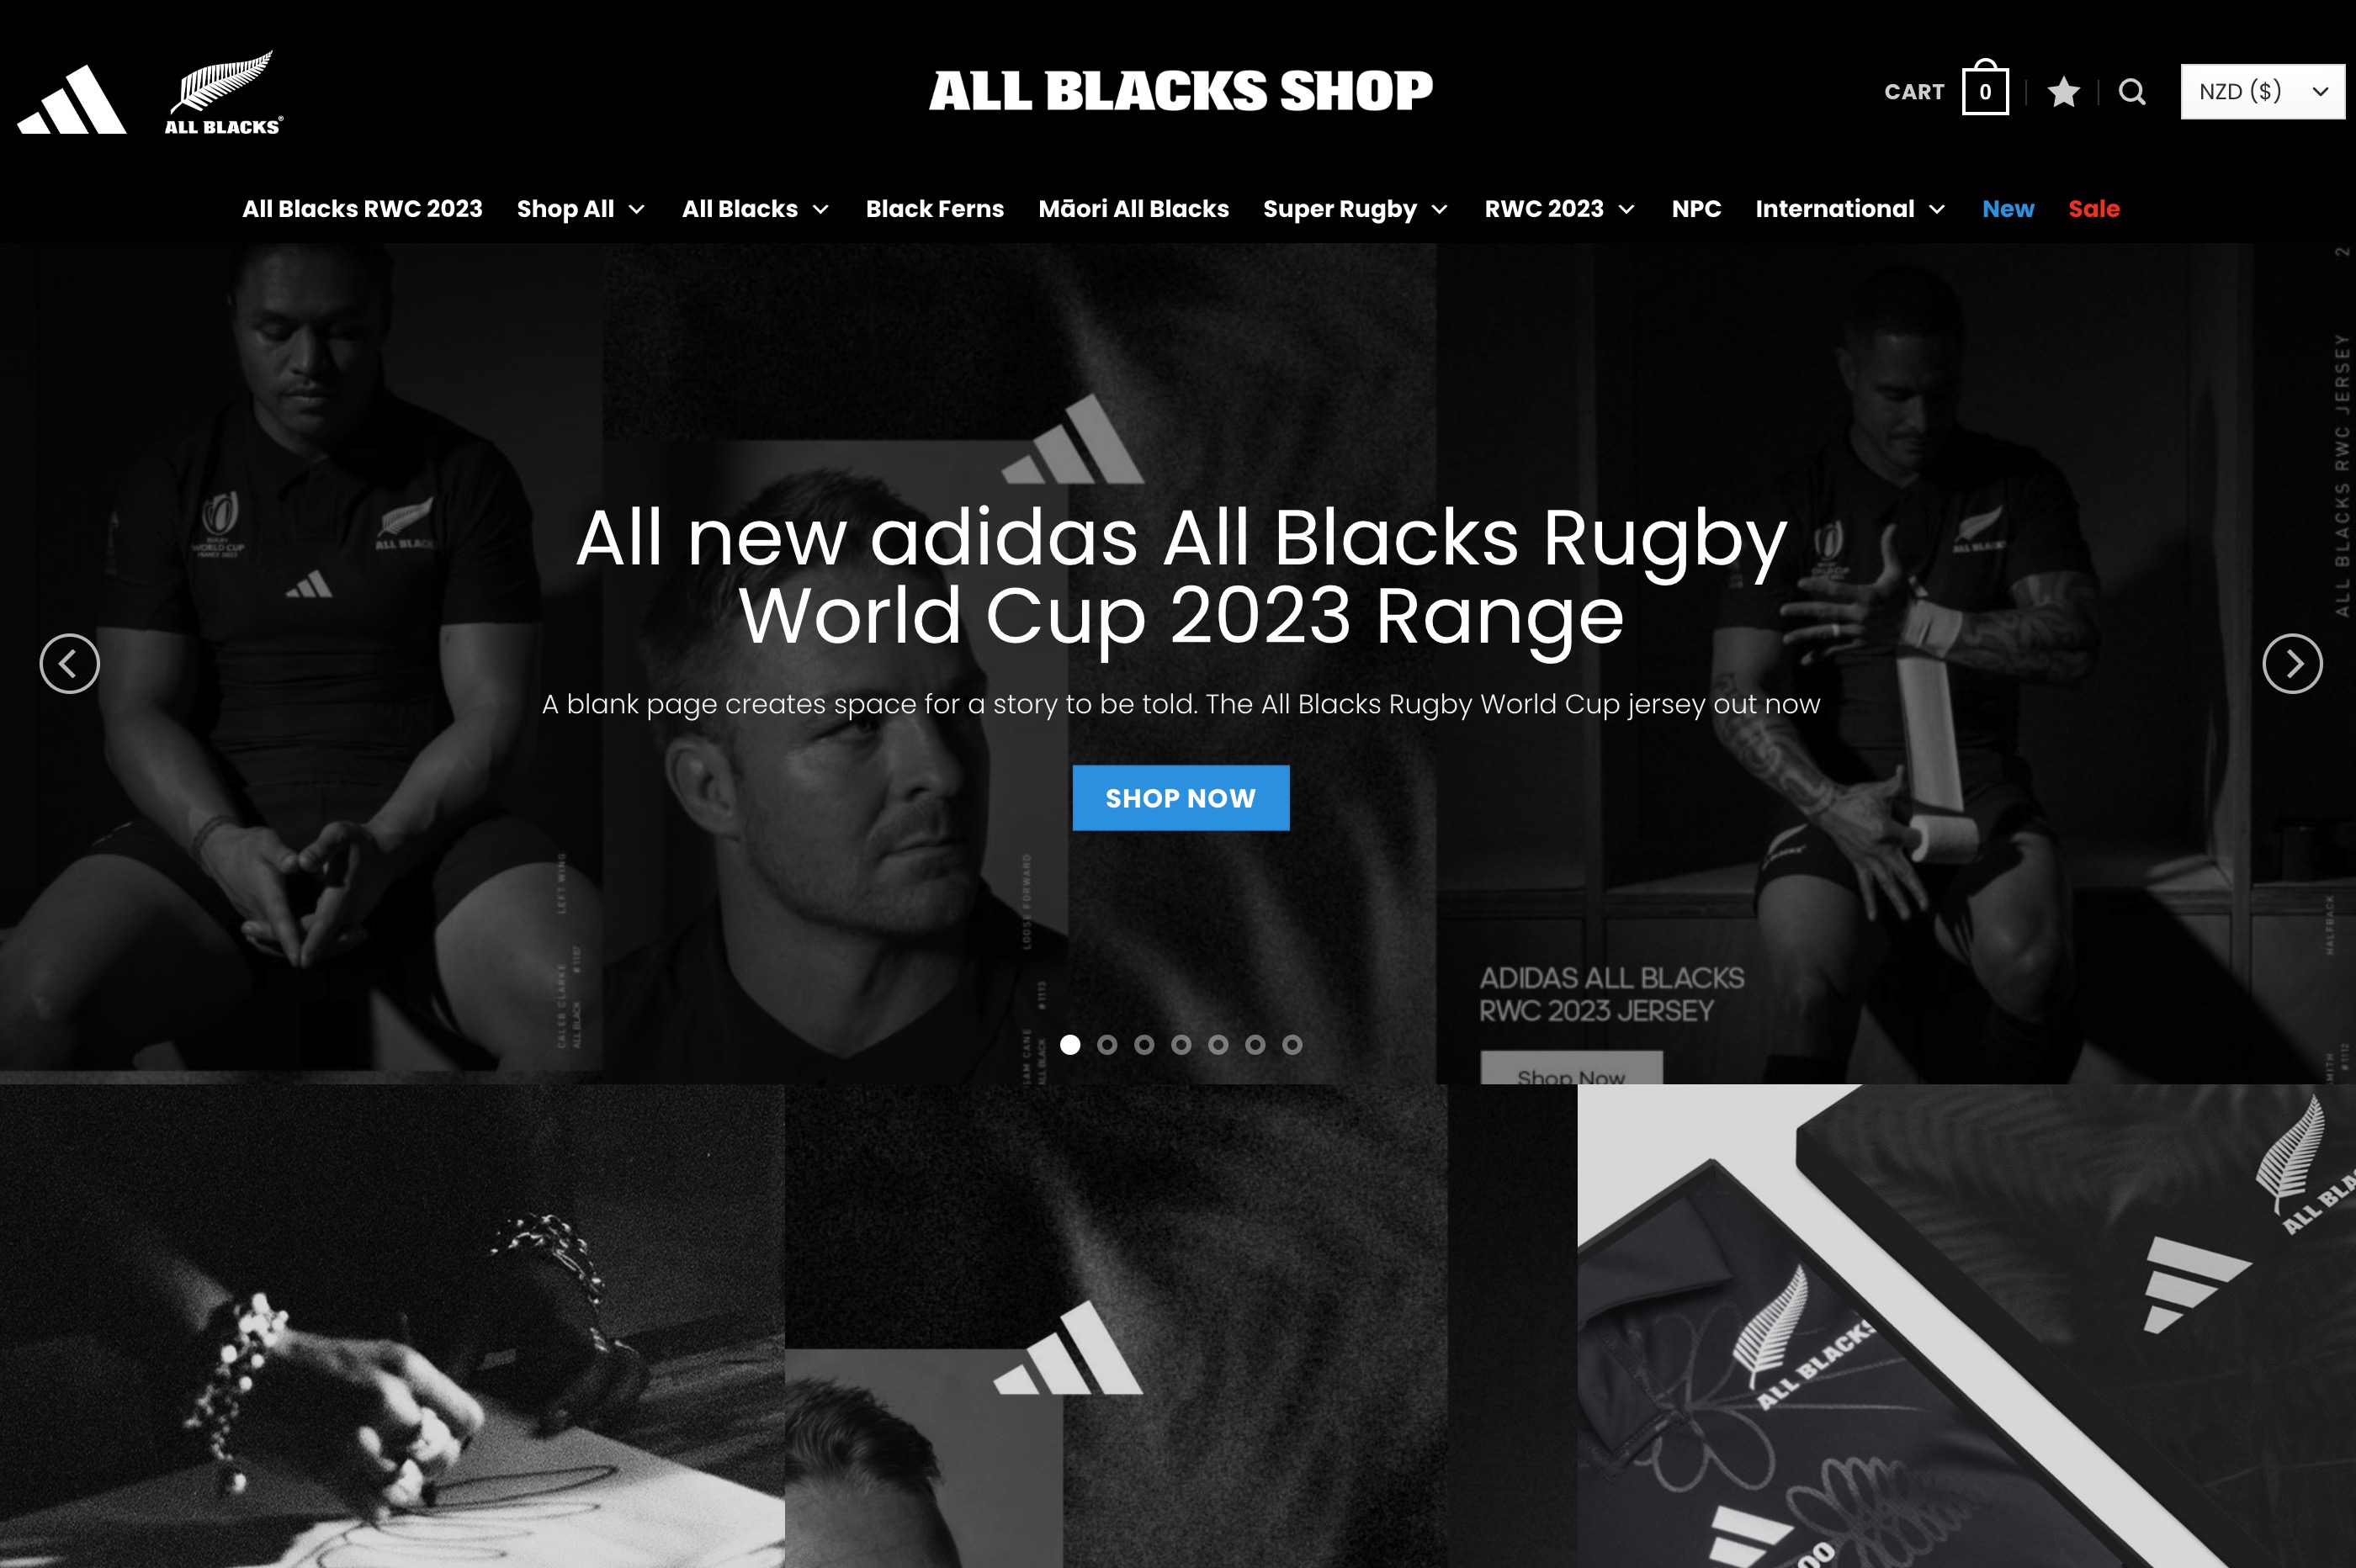 The All Blacks website uses open source ecommerce.